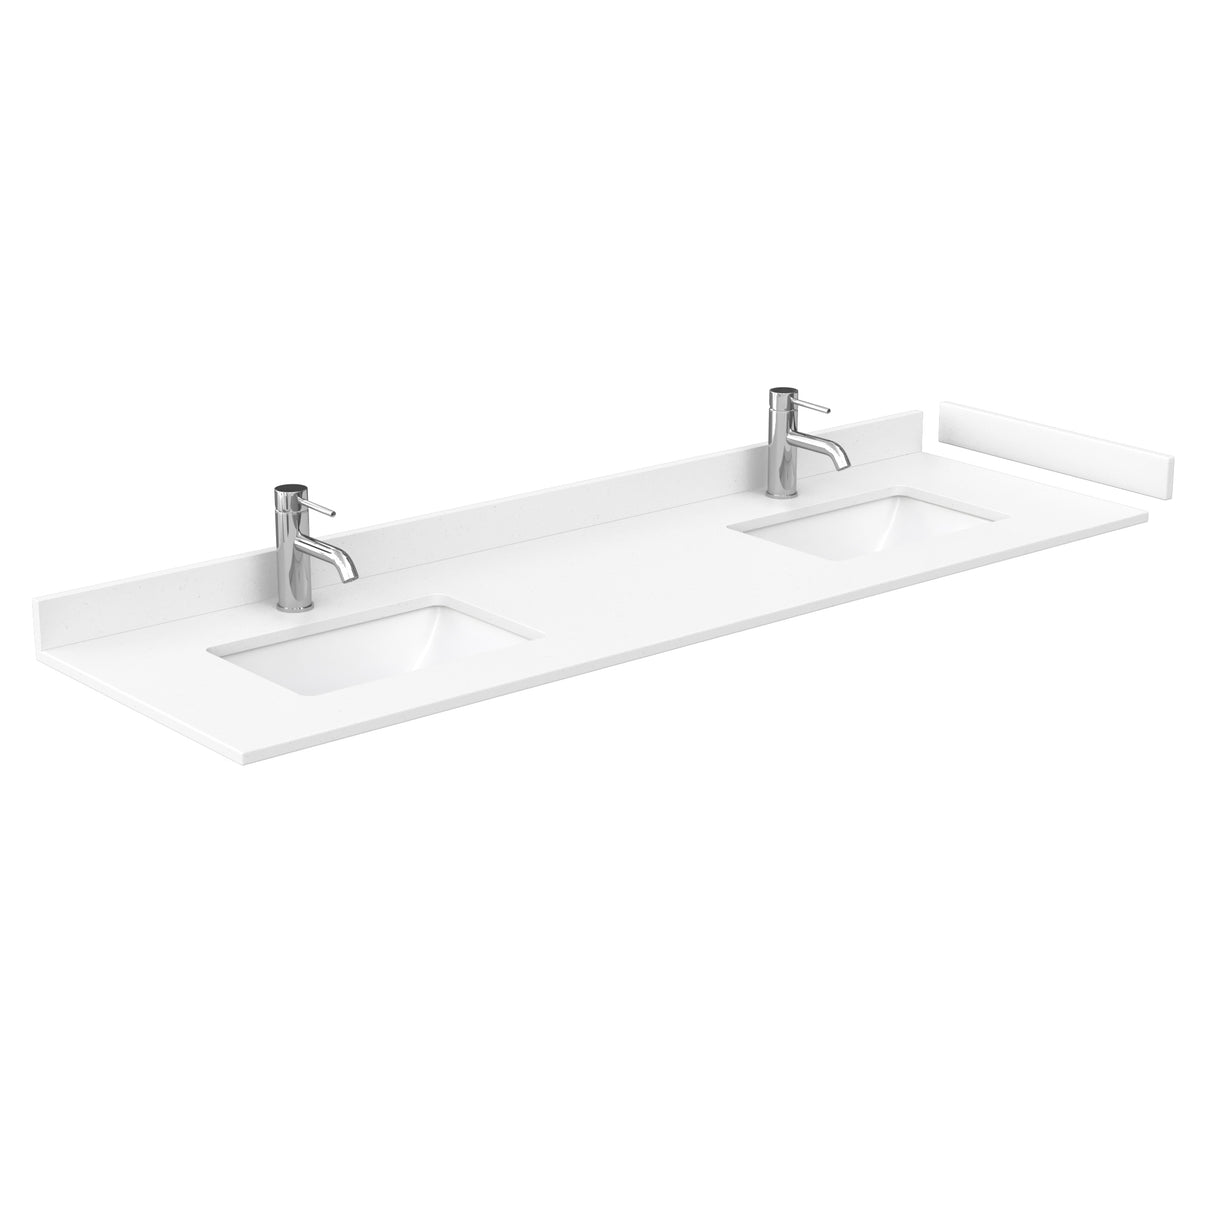 Sheffield 72 Inch Double Bathroom Vanity in Espresso White Cultured Marble Countertop Undermount Square Sinks 24 Inch Mirrors